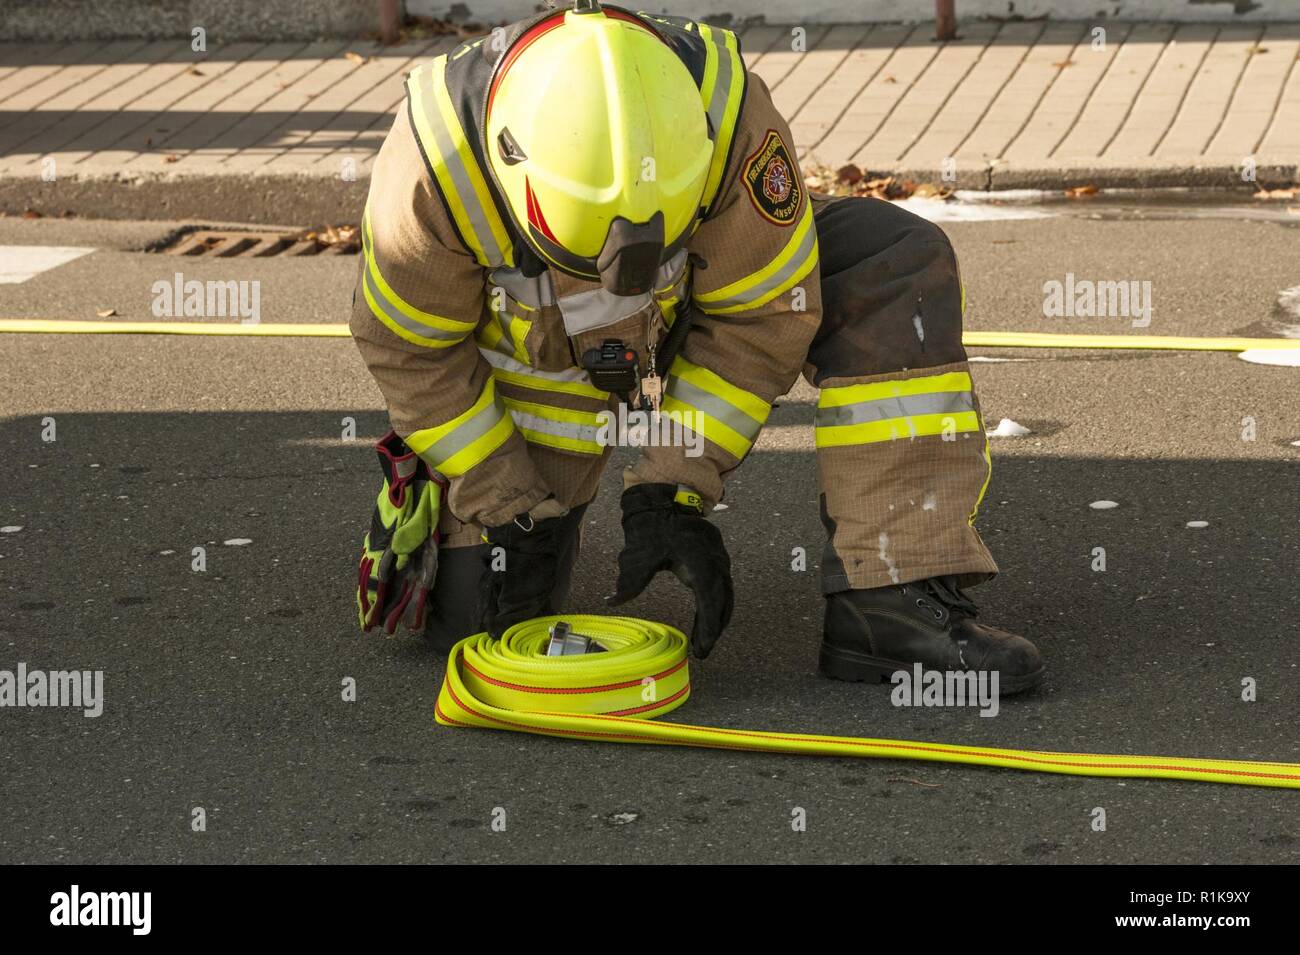 ANSBACH, Germany (Oct. 10, 2018) -- U.S. Army Garrison Ansbach firefighters conducted a fire drill exercise at the Barton Barracks, LRC in Ansbach,  during the fire prevention week 2018. The exercise was based on a simulated  scenario, rescuing a person from the 3rd floor and evacuating the remaining  personnel. Stock Photo